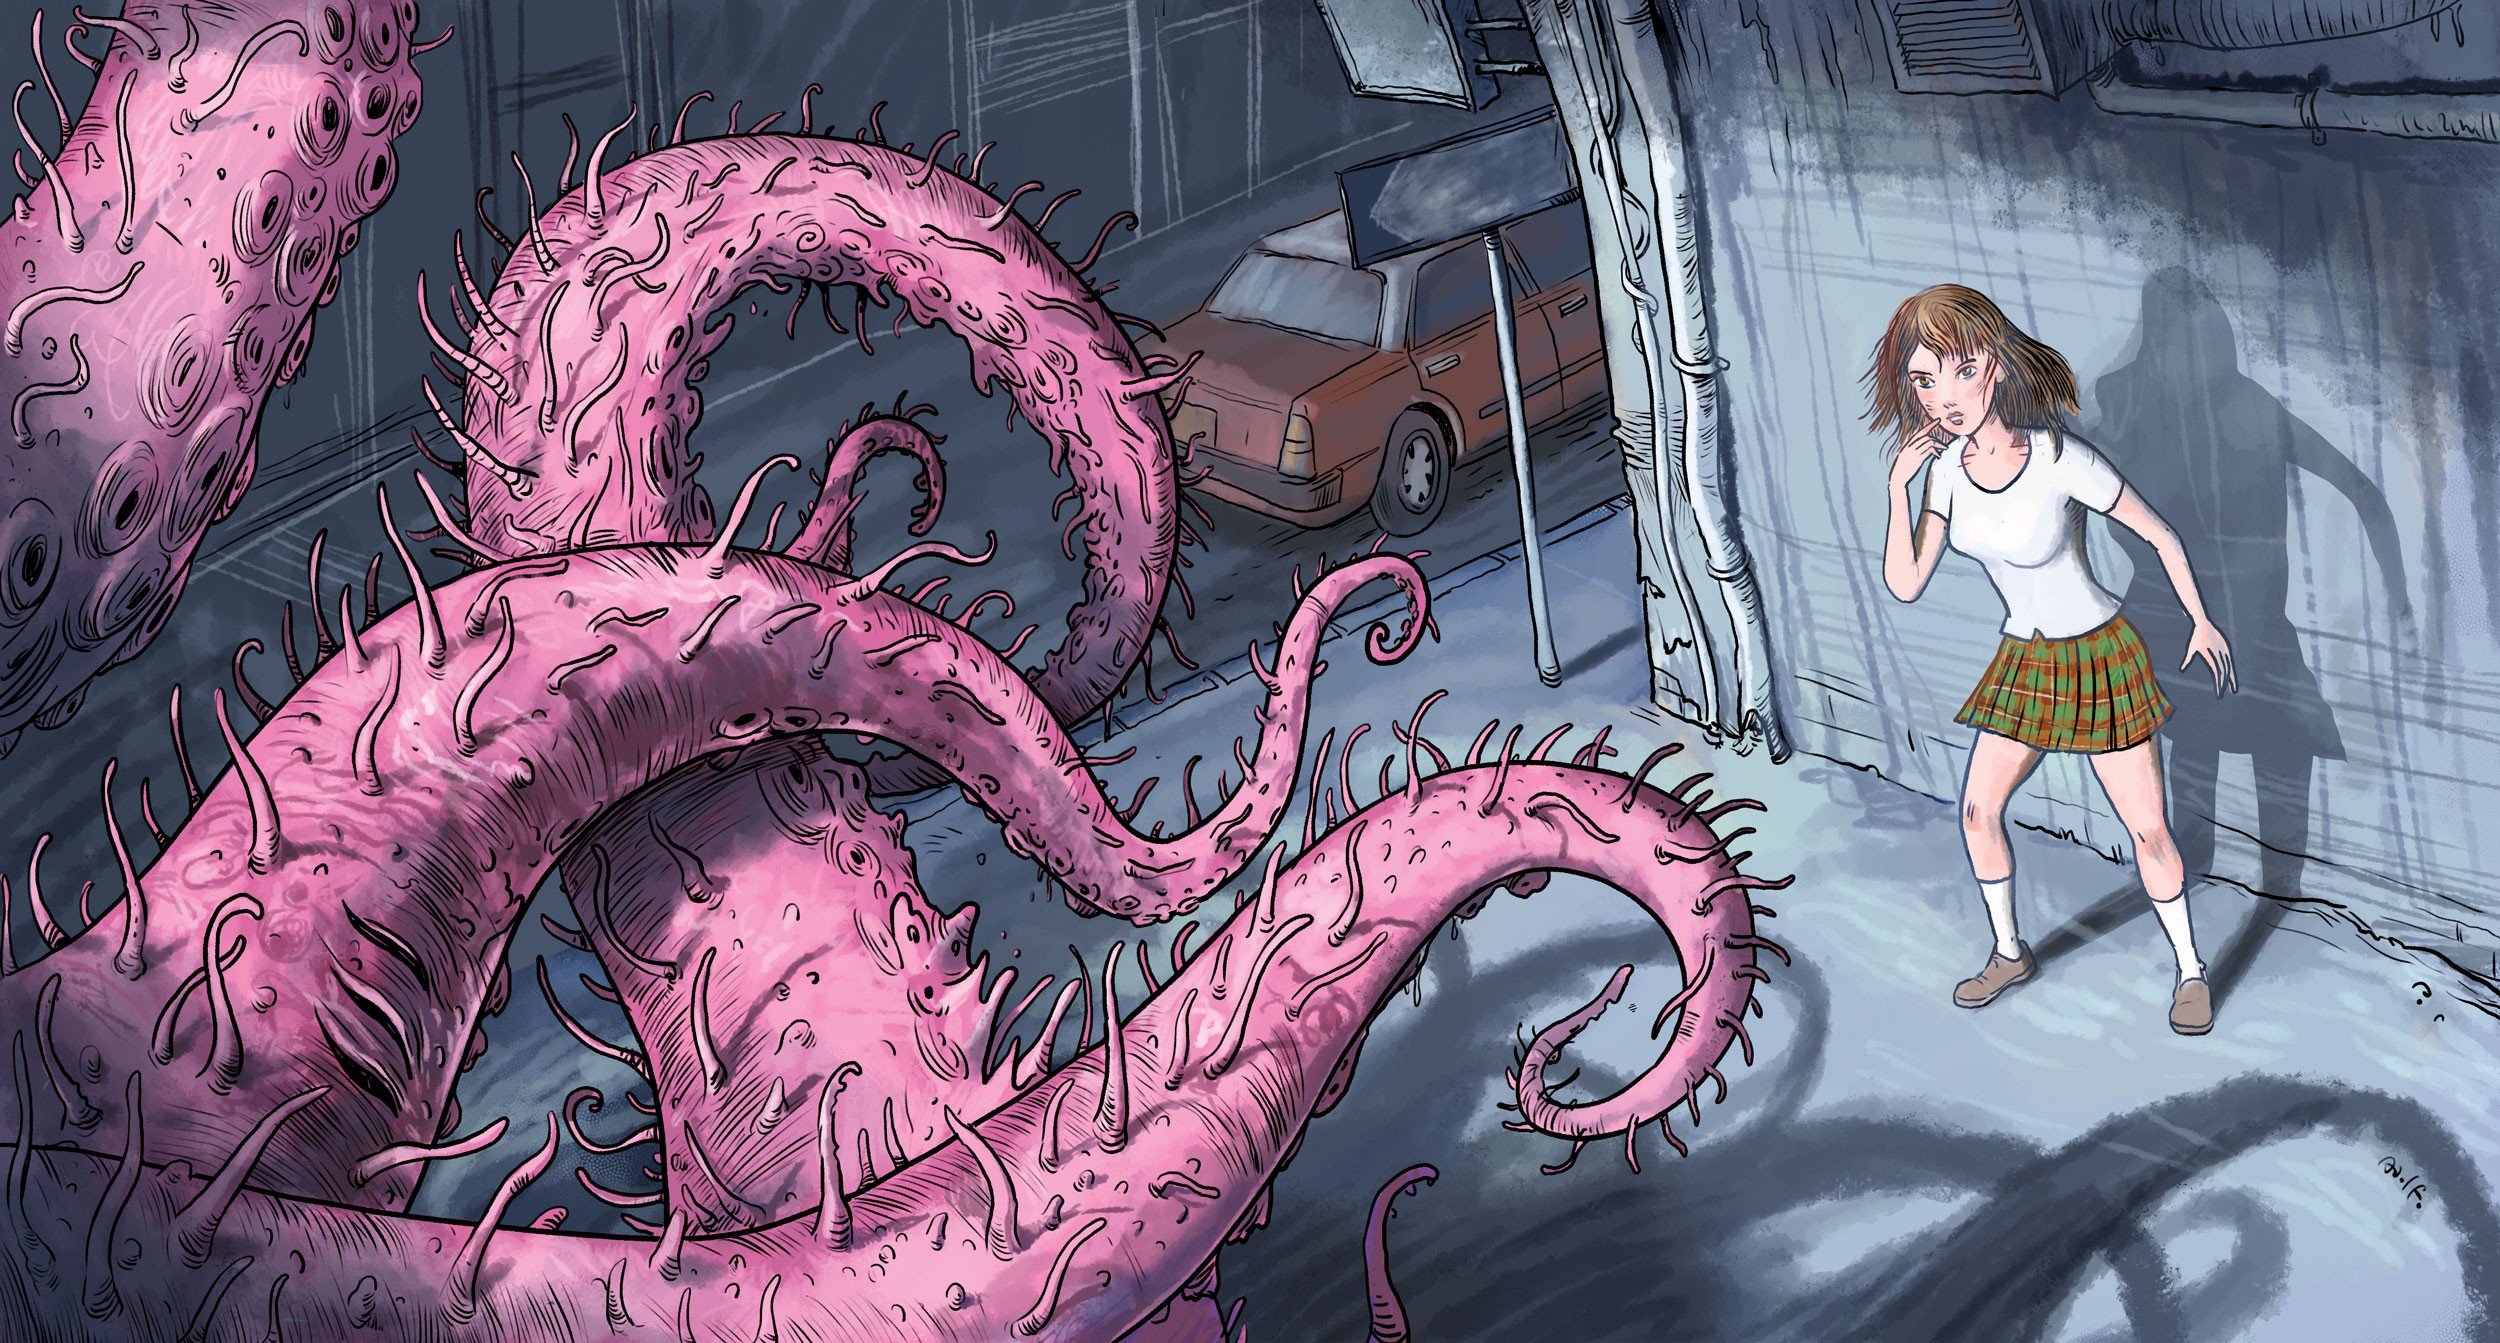 Hentai, or Japanese anime porn, is a category popular among Hong Kong pornography viewers that has a variety of subgenres, including some that involve alien tentacles. Illustration: Adolfo Arranz